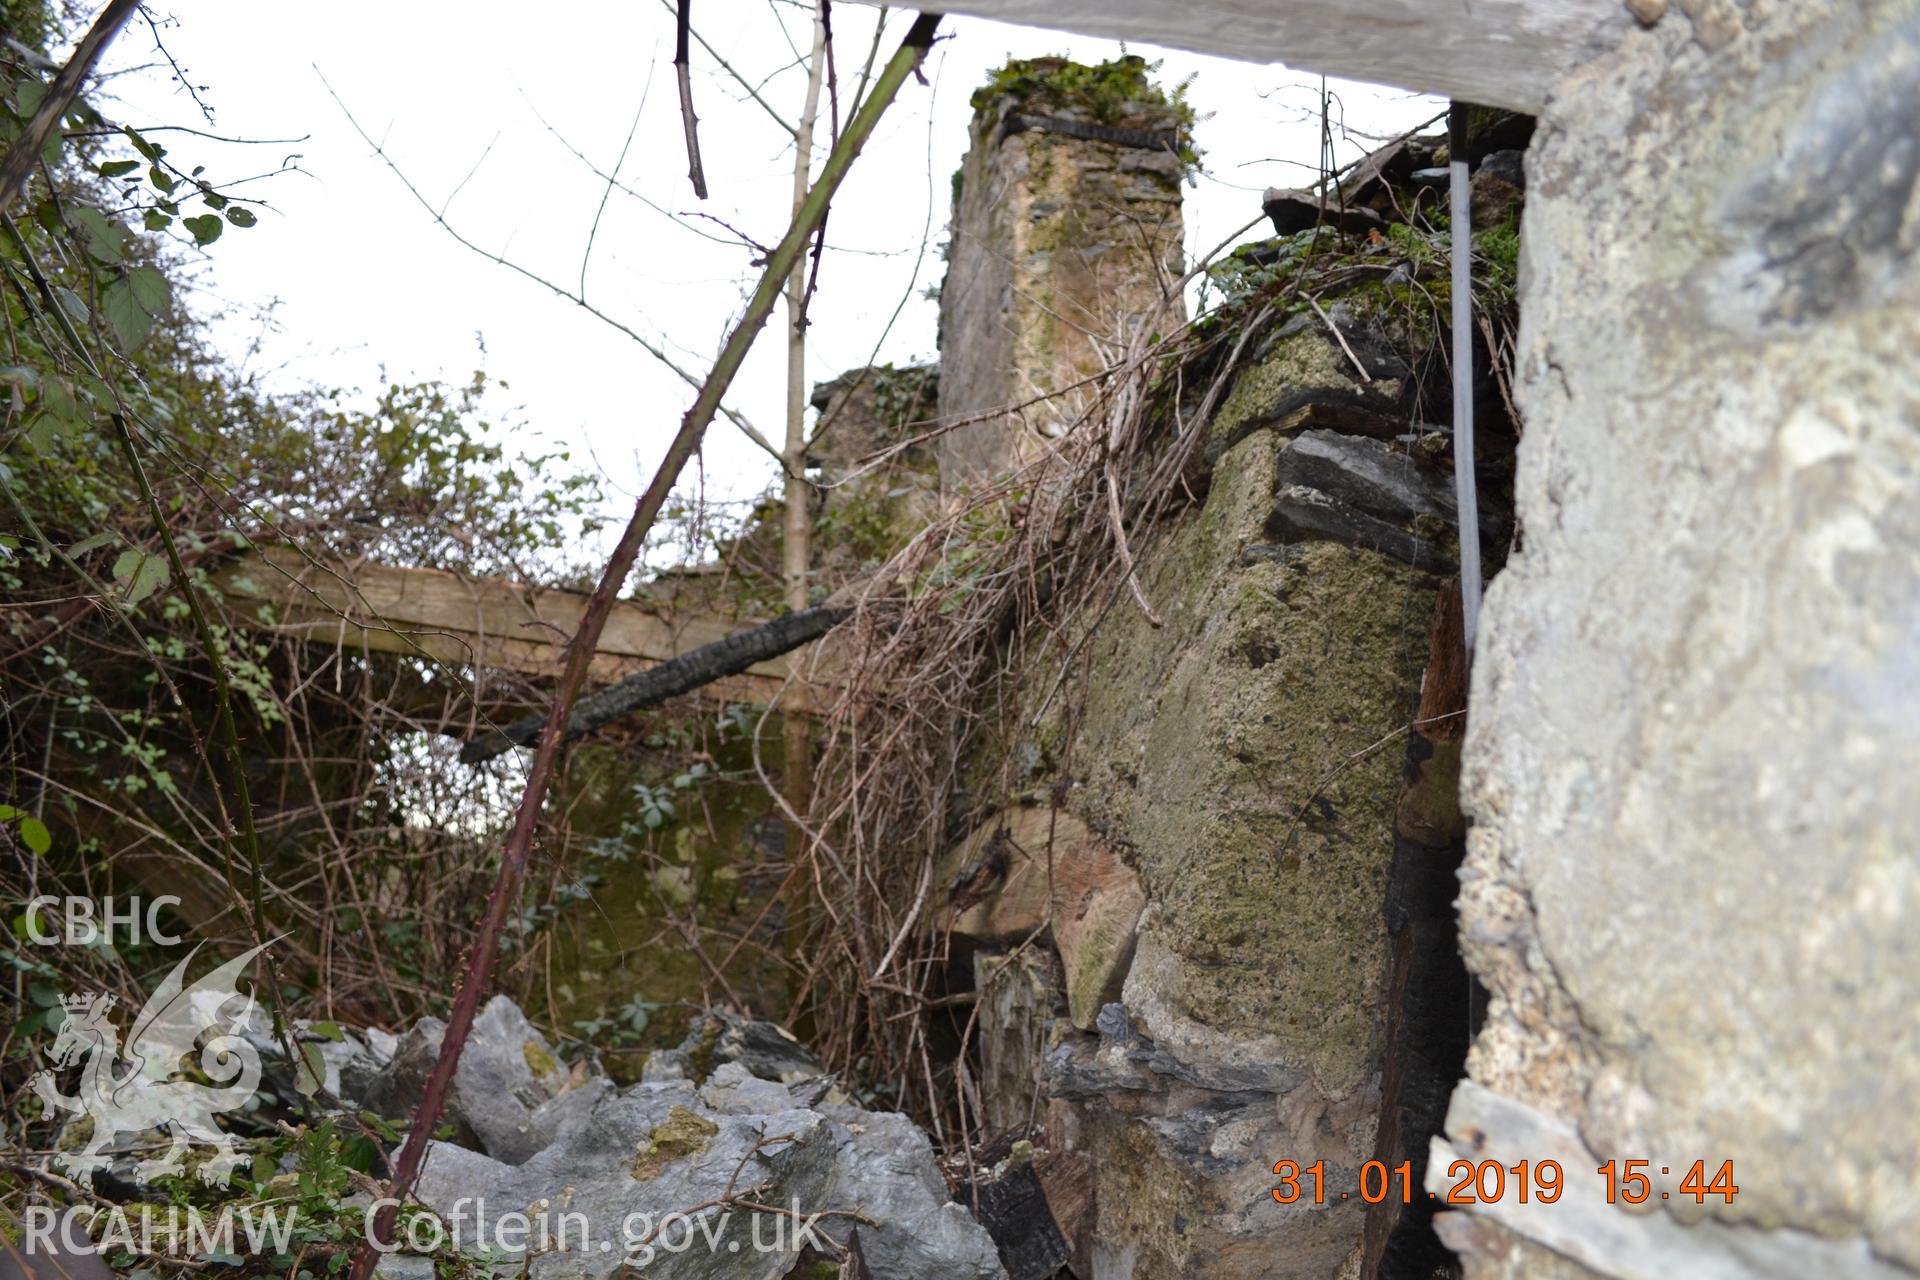 Digital colour photograph showing interior view of the old living room at Fron Deg, Caergeiliog, Ynys Mon. Produced by Gerwyn Williams to meet a condition attached to a planning application, 2019.